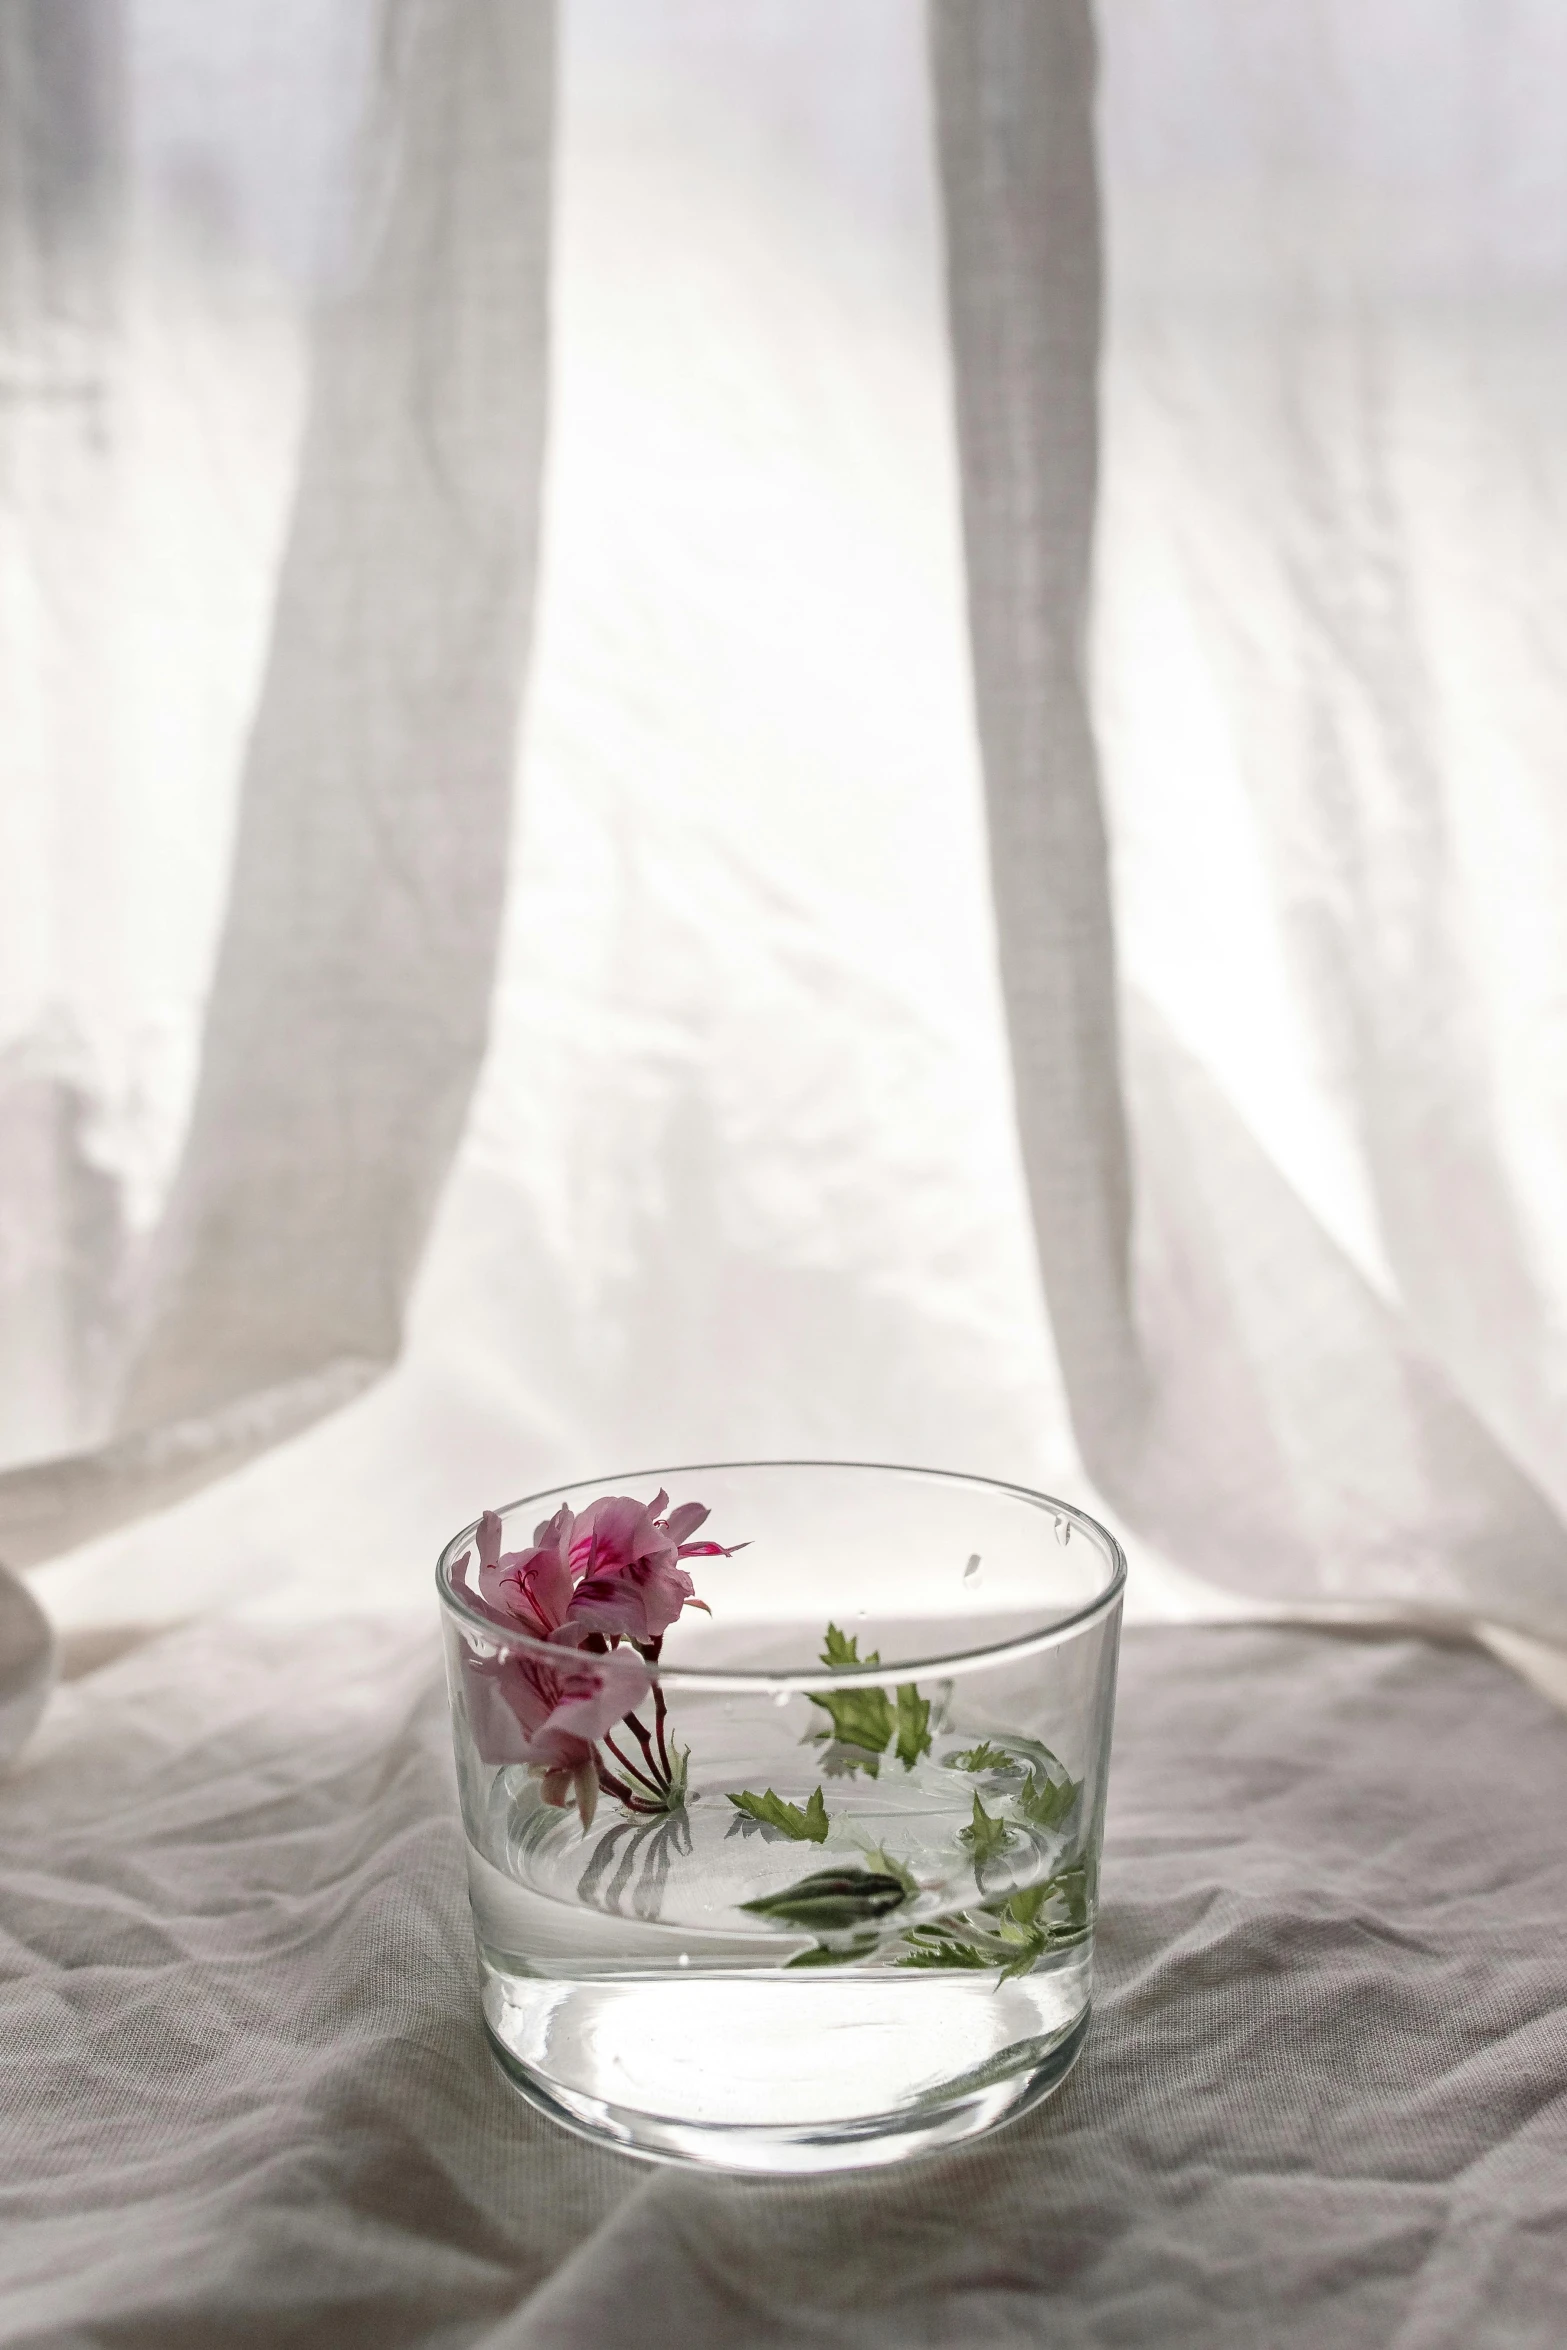 a glass of water with a flower in it, a still life, unsplash, photorealism, soft light - n 9, small, seasonal, herbs